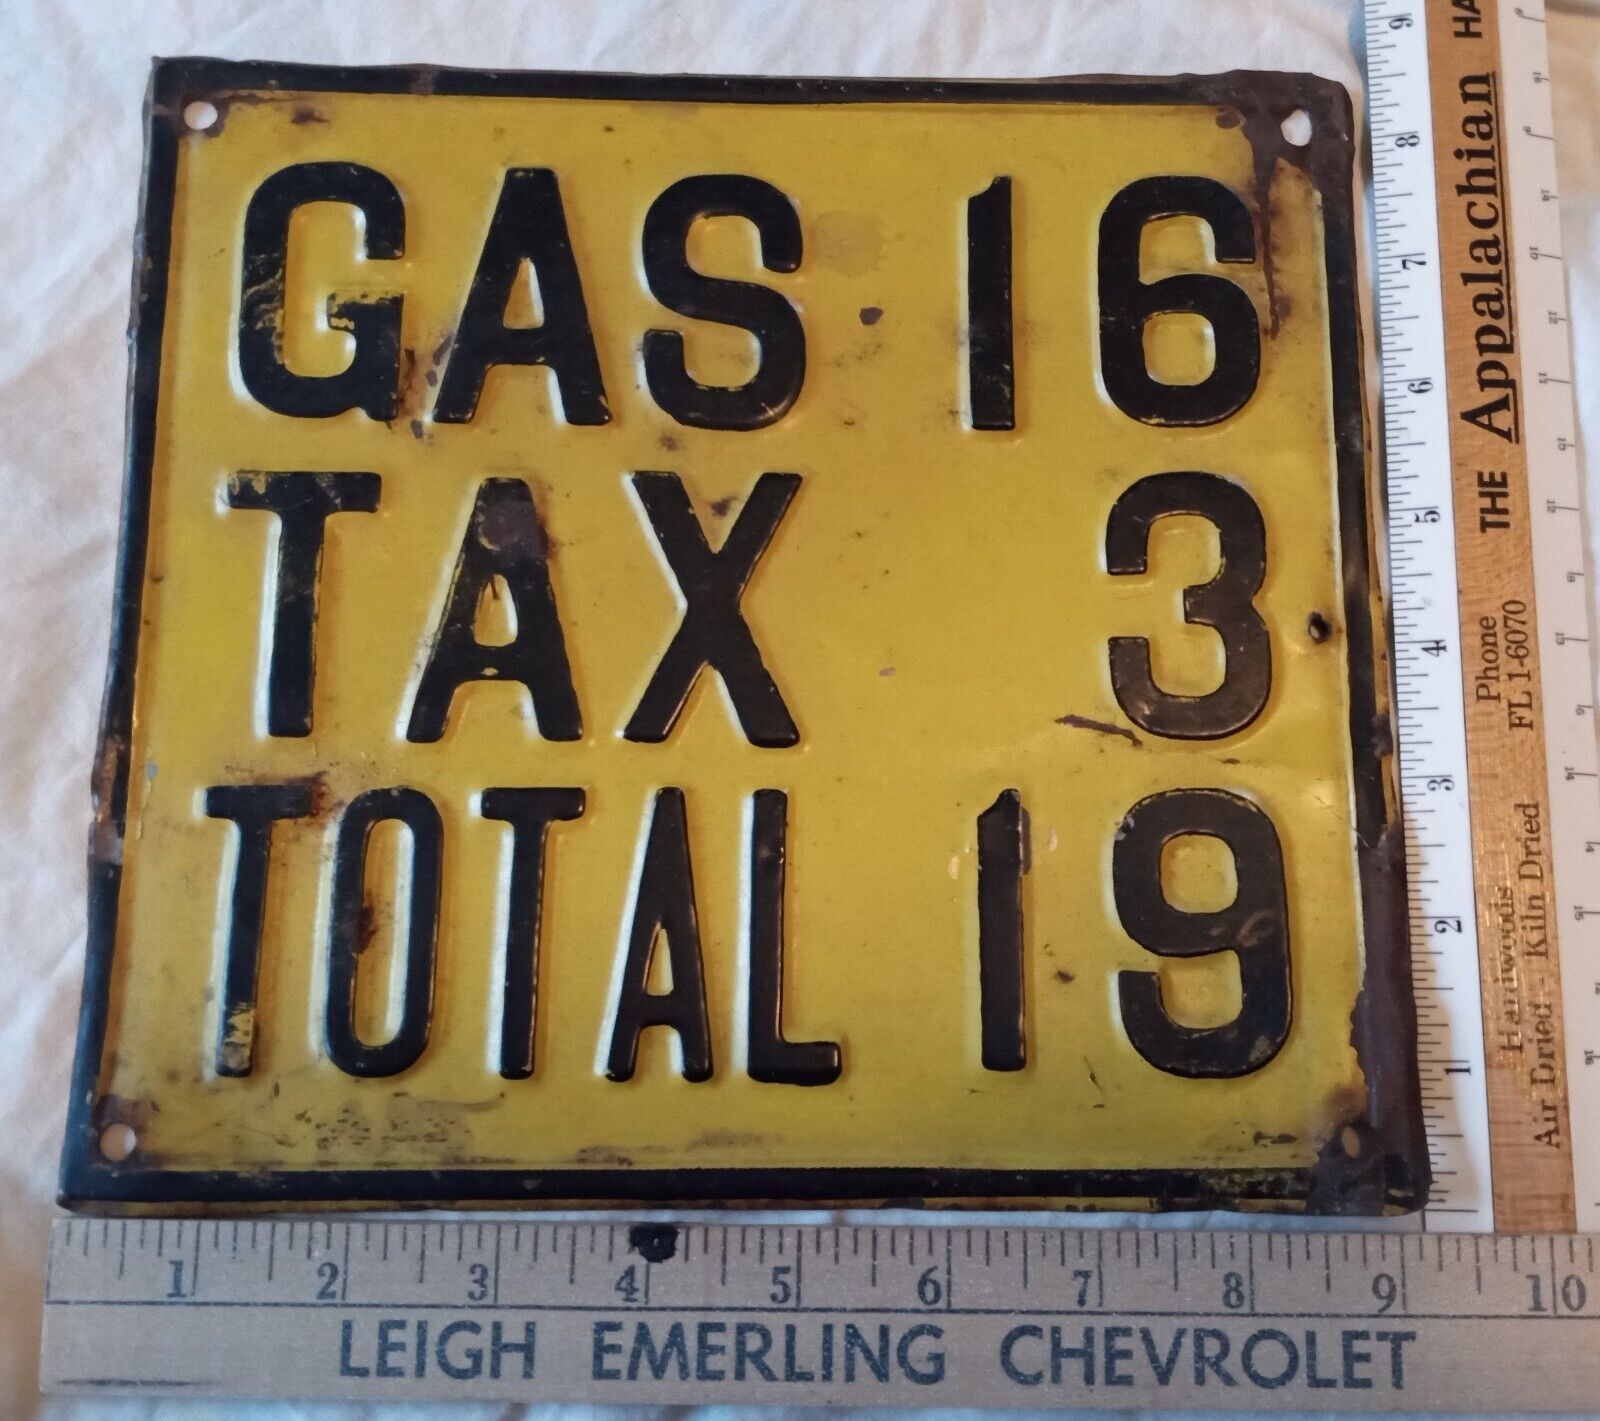 Original Antique 1930s Metal Embossed Gas Station Price Sign 19 Cents A Gallon